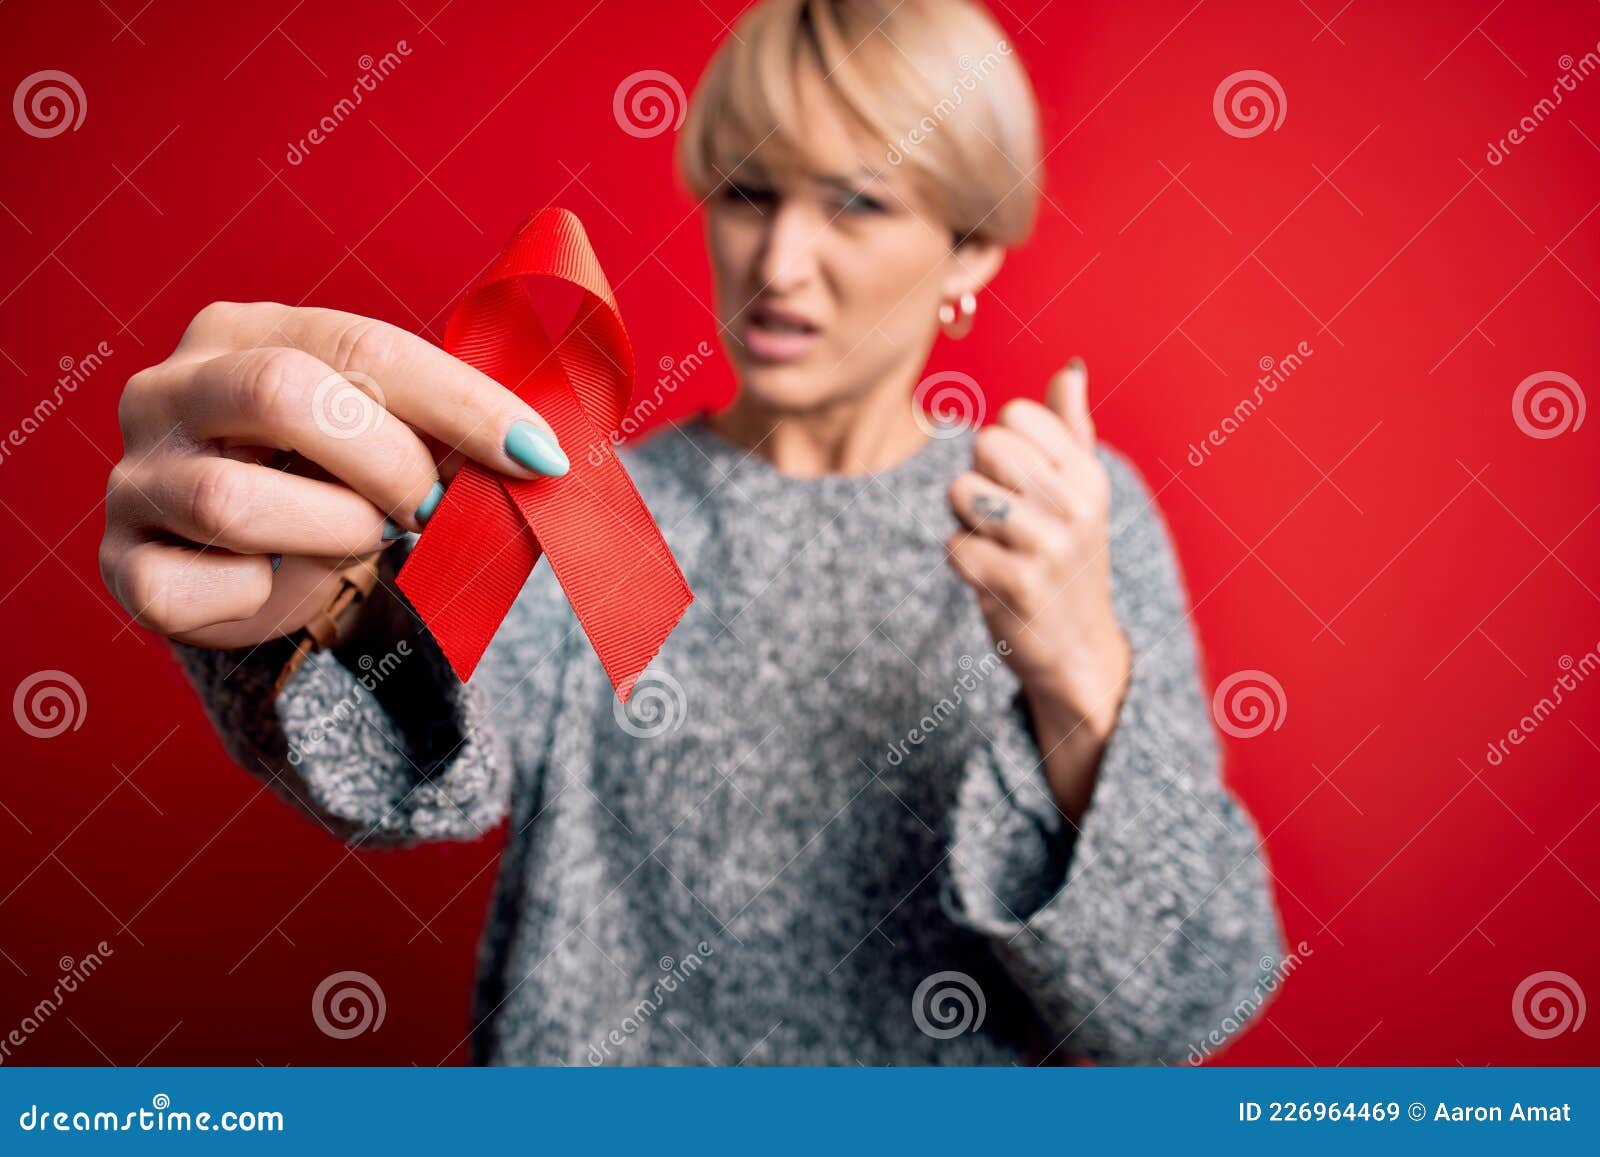 Blonde Hair and HIV Immunity: What's the Connection? - wide 3